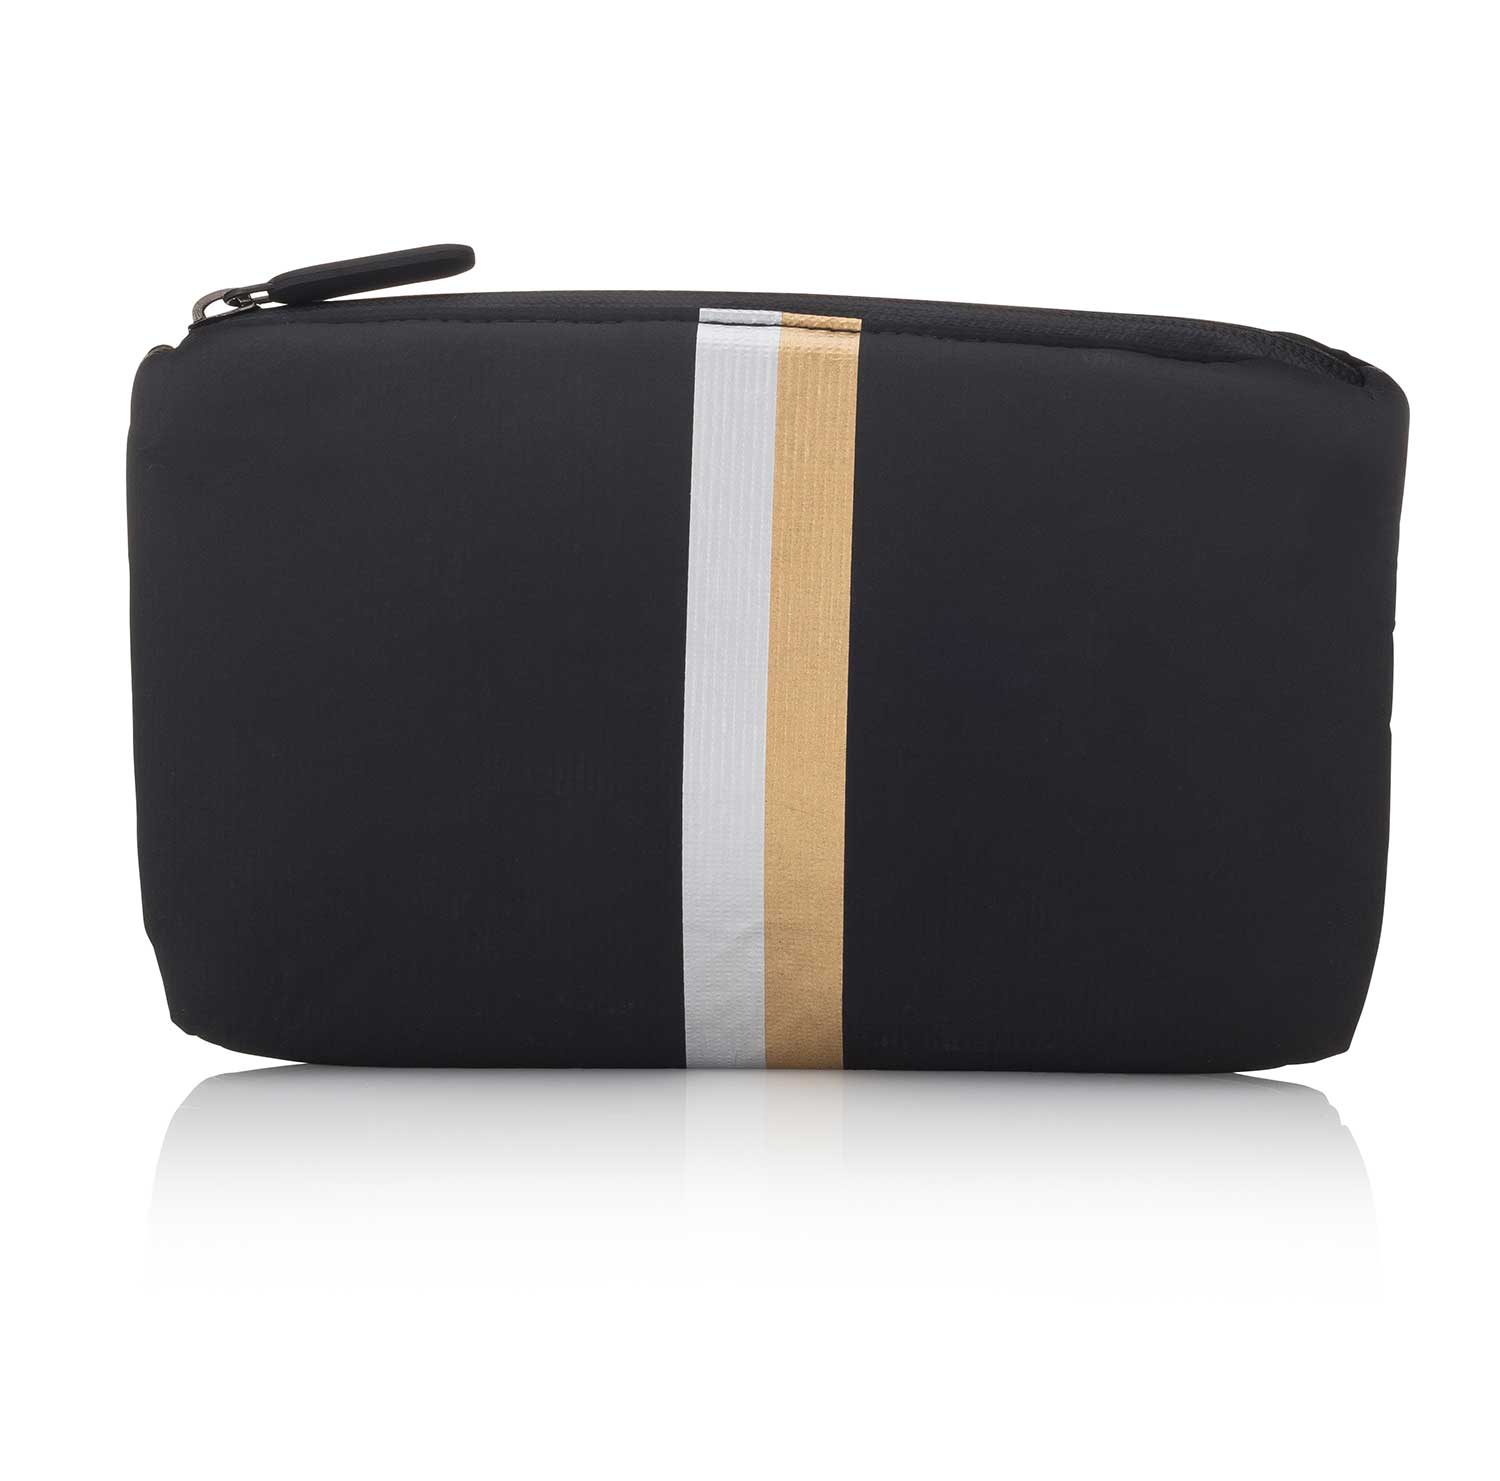 Cute Travel Clutch - Mini Padded Pack - Hi Love Black with Metallic Silver and Gold Stripes